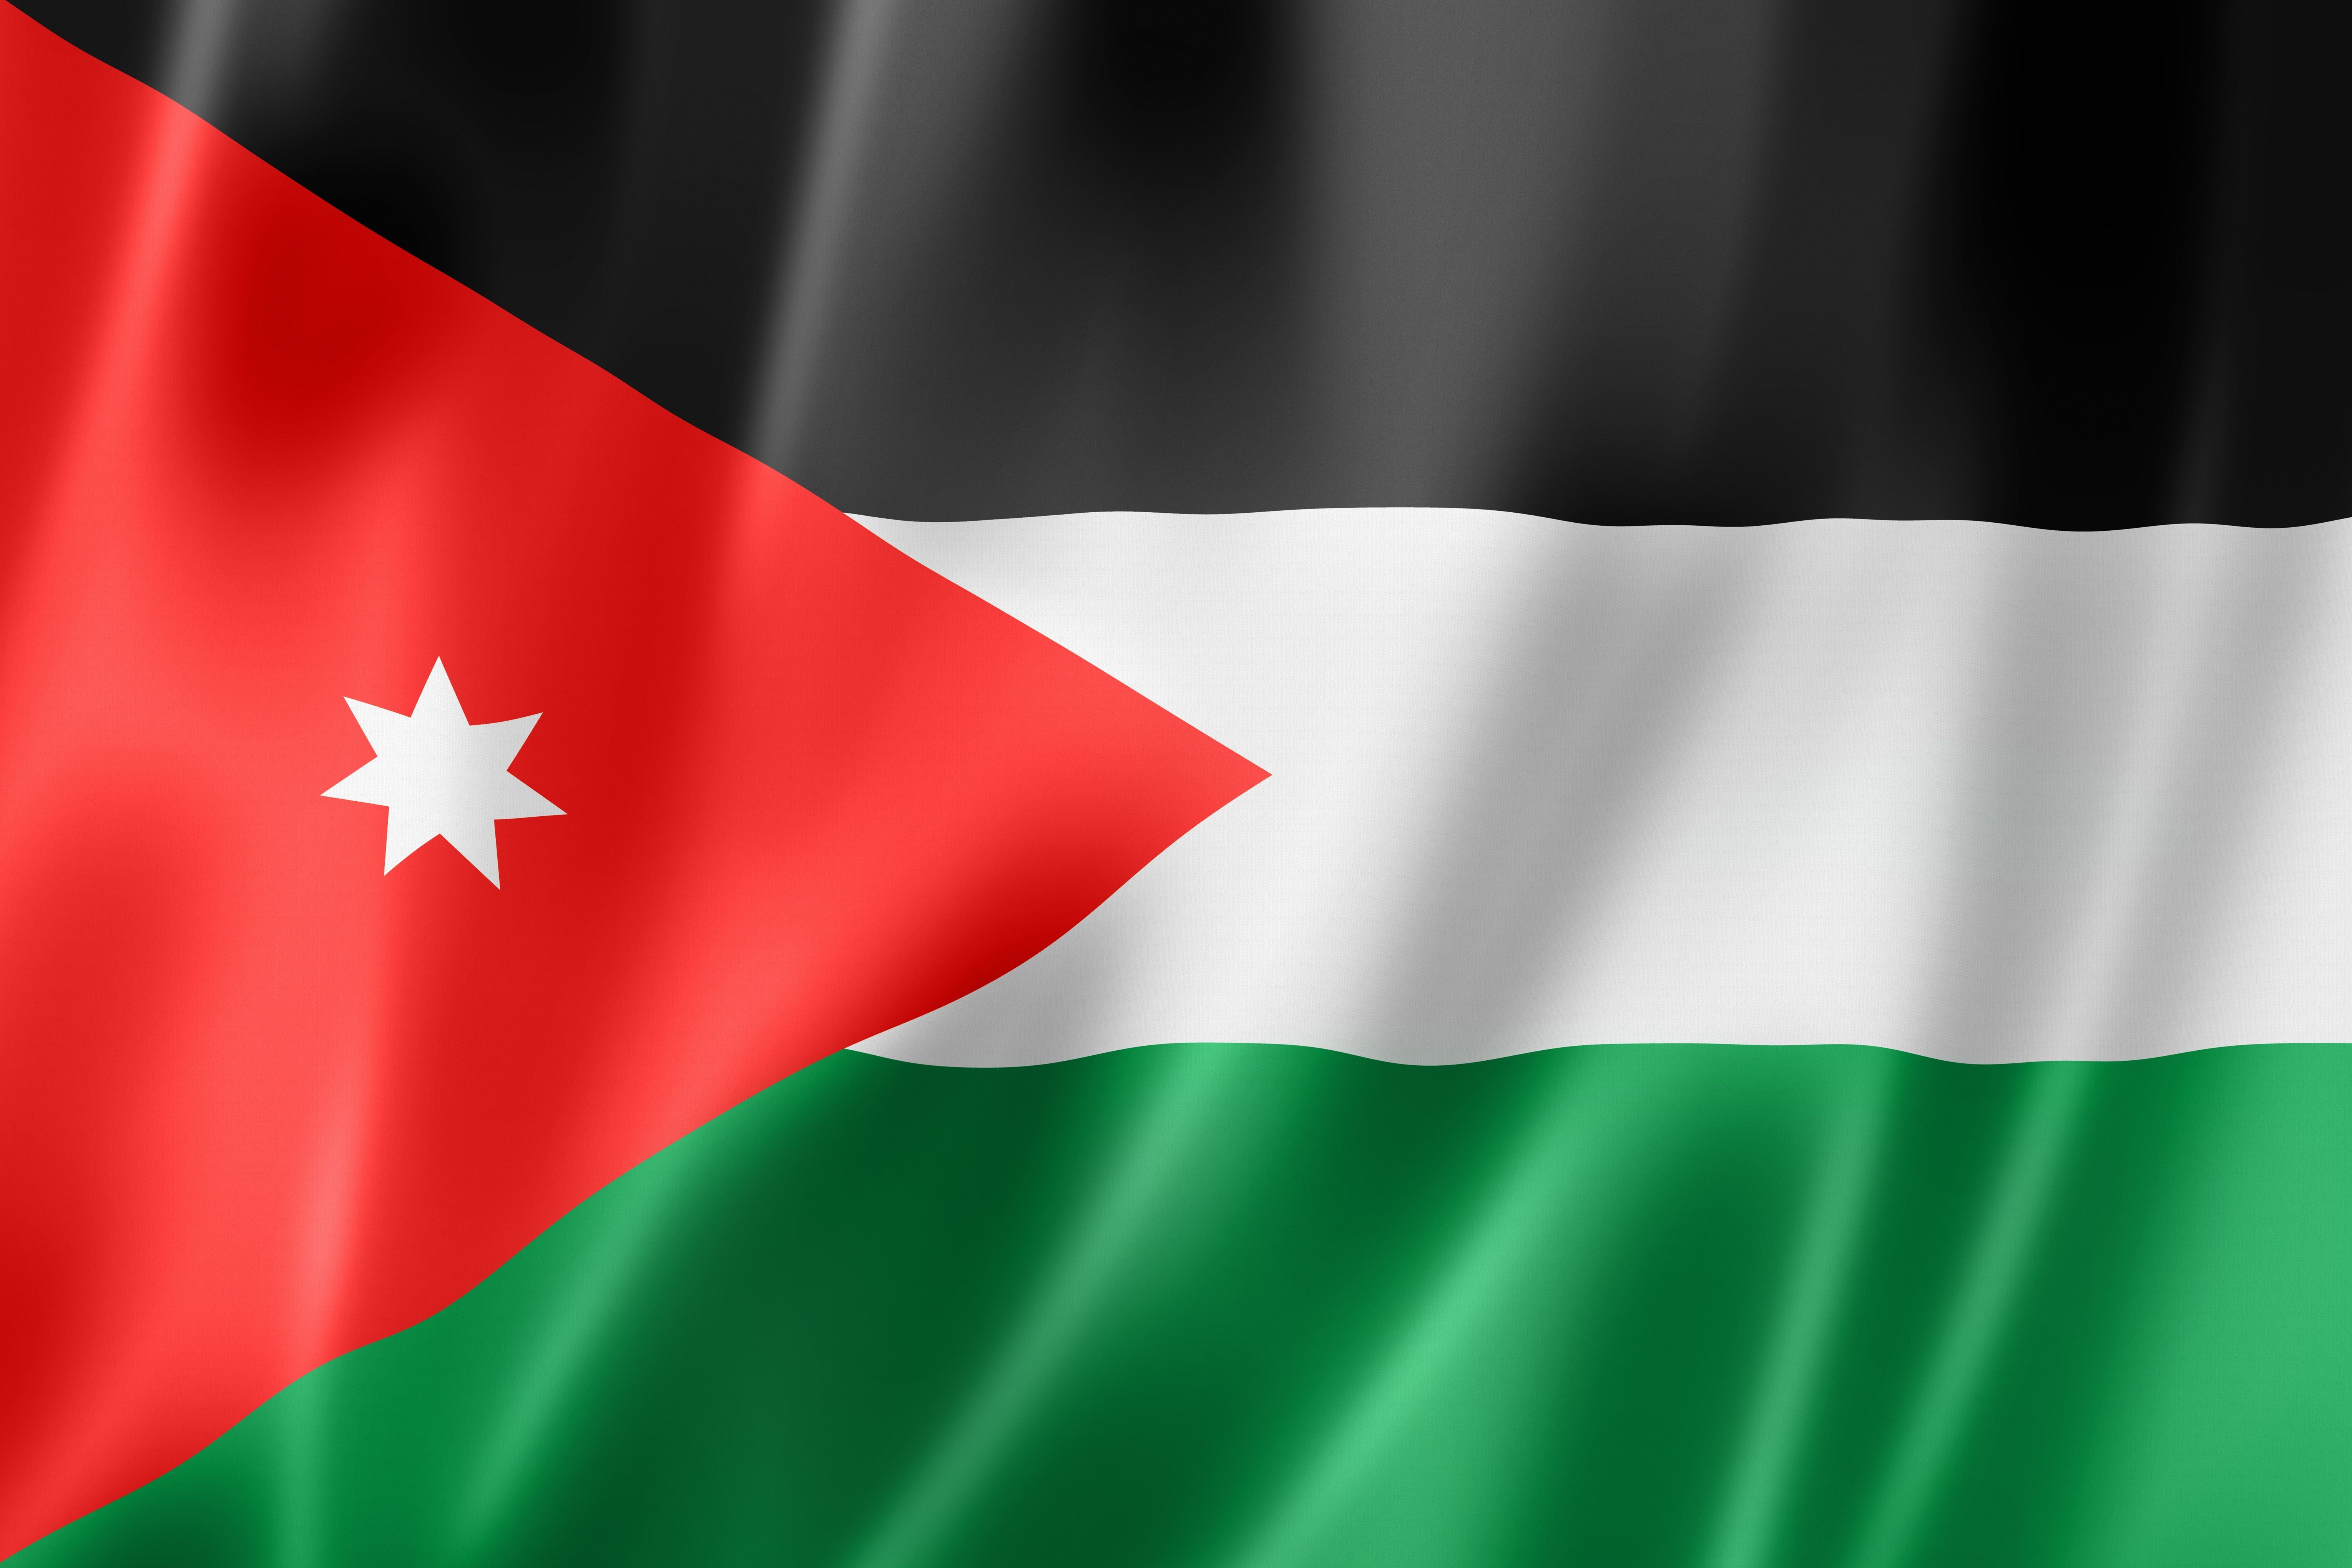 Flag of Jordan, officially adopted on 18 April is based on